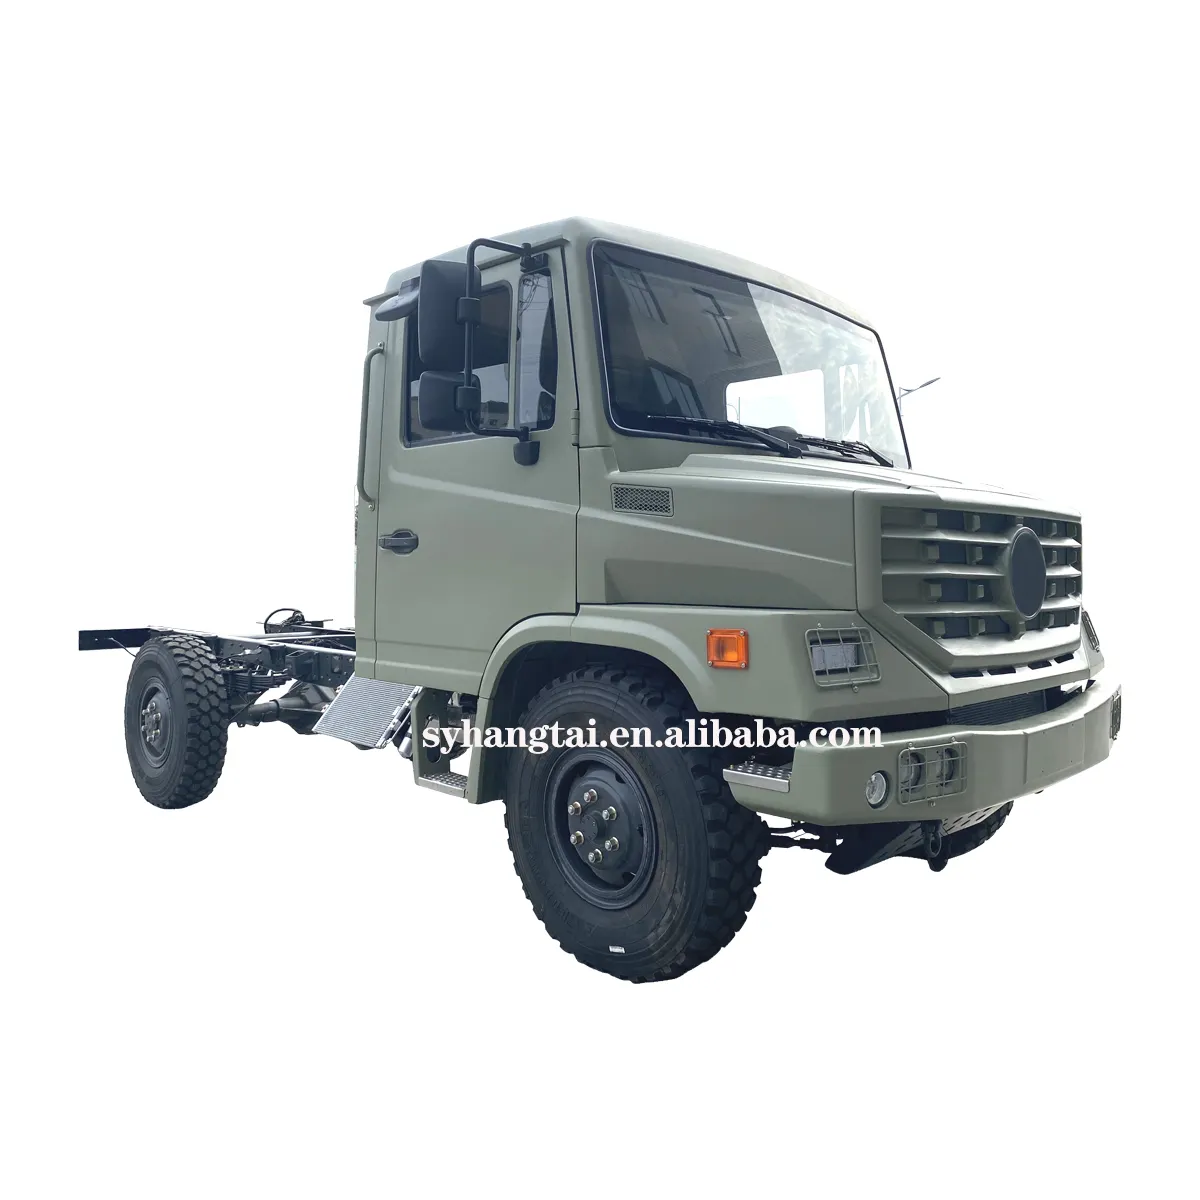 Customized Unimog Model 4x4 Off-road Forest Fire Rescue All Terrain Truck Chassis 4 Wheels Drive